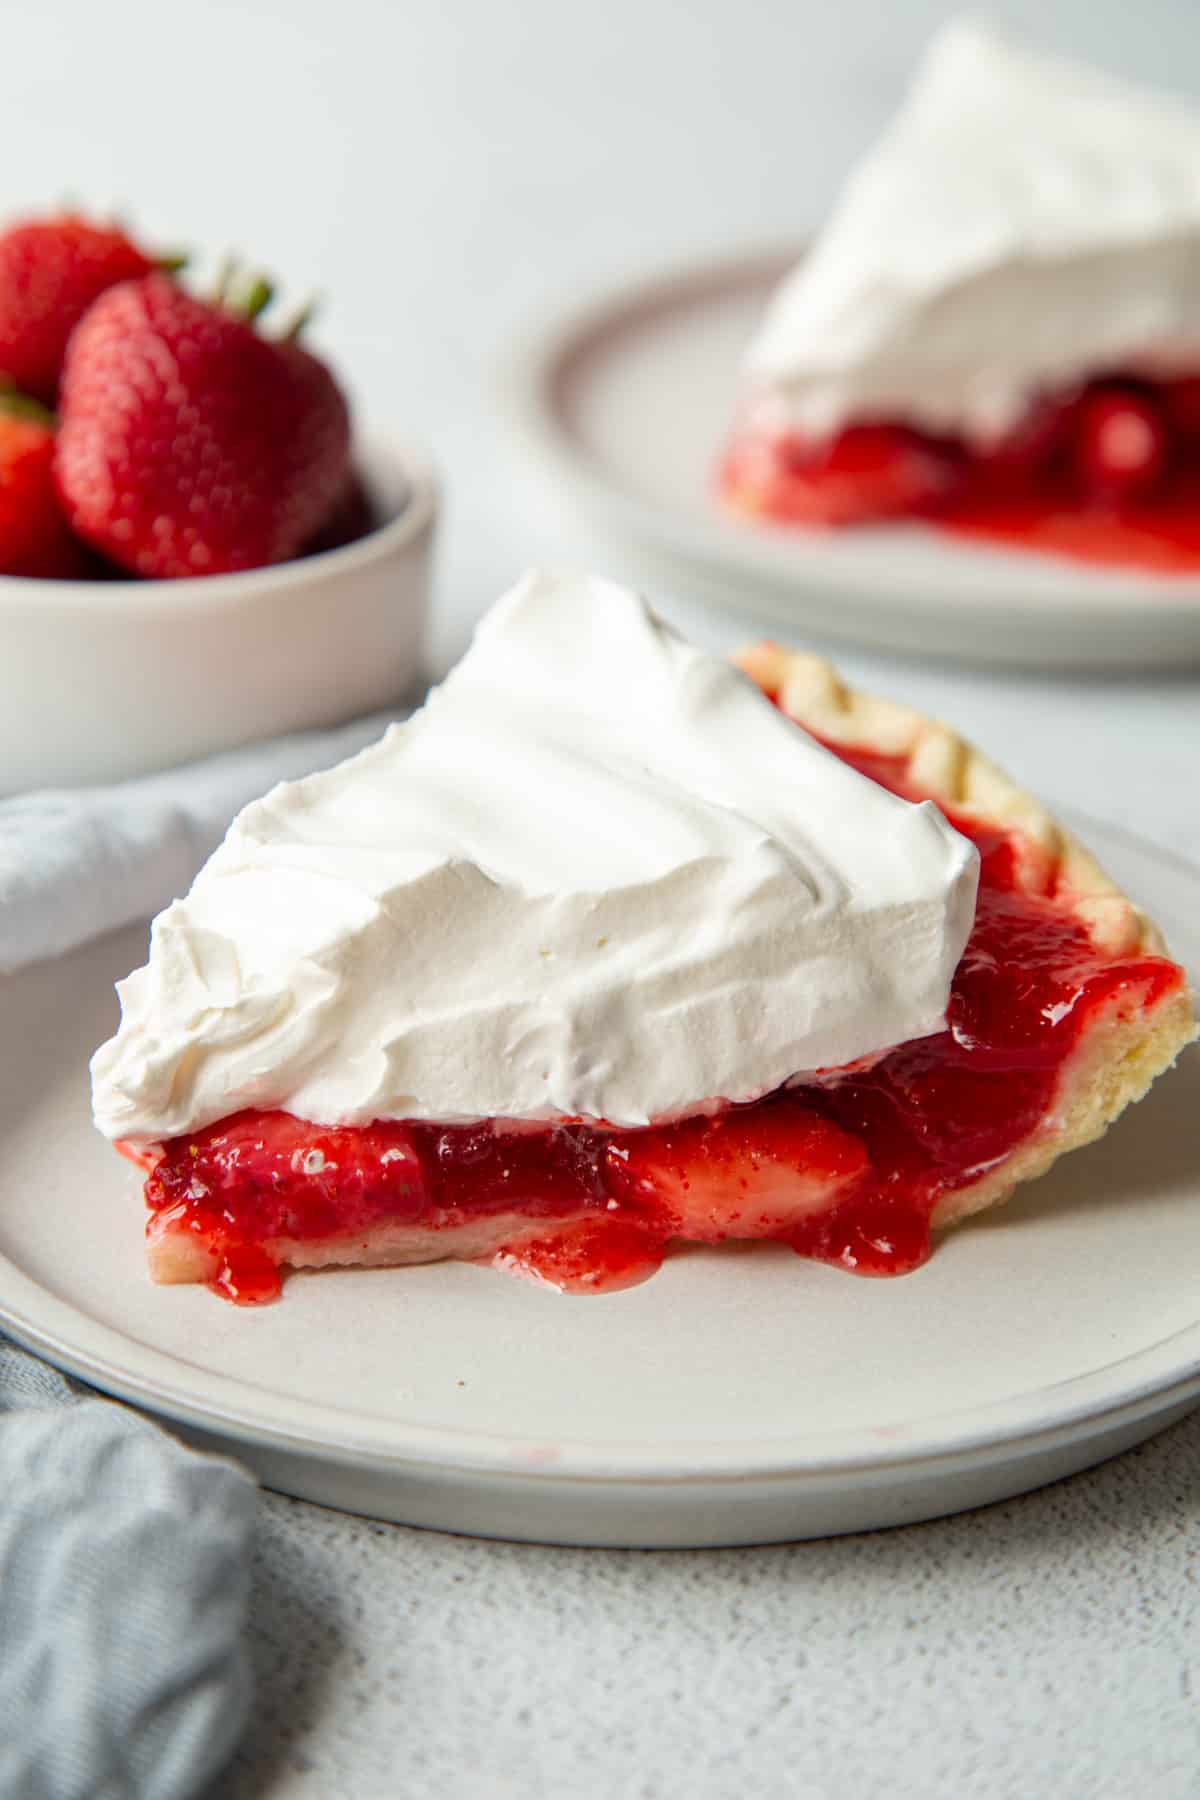 slices of strawberry pie topped with whipped topping on white plates, next to a small dish of fresh strawberries.